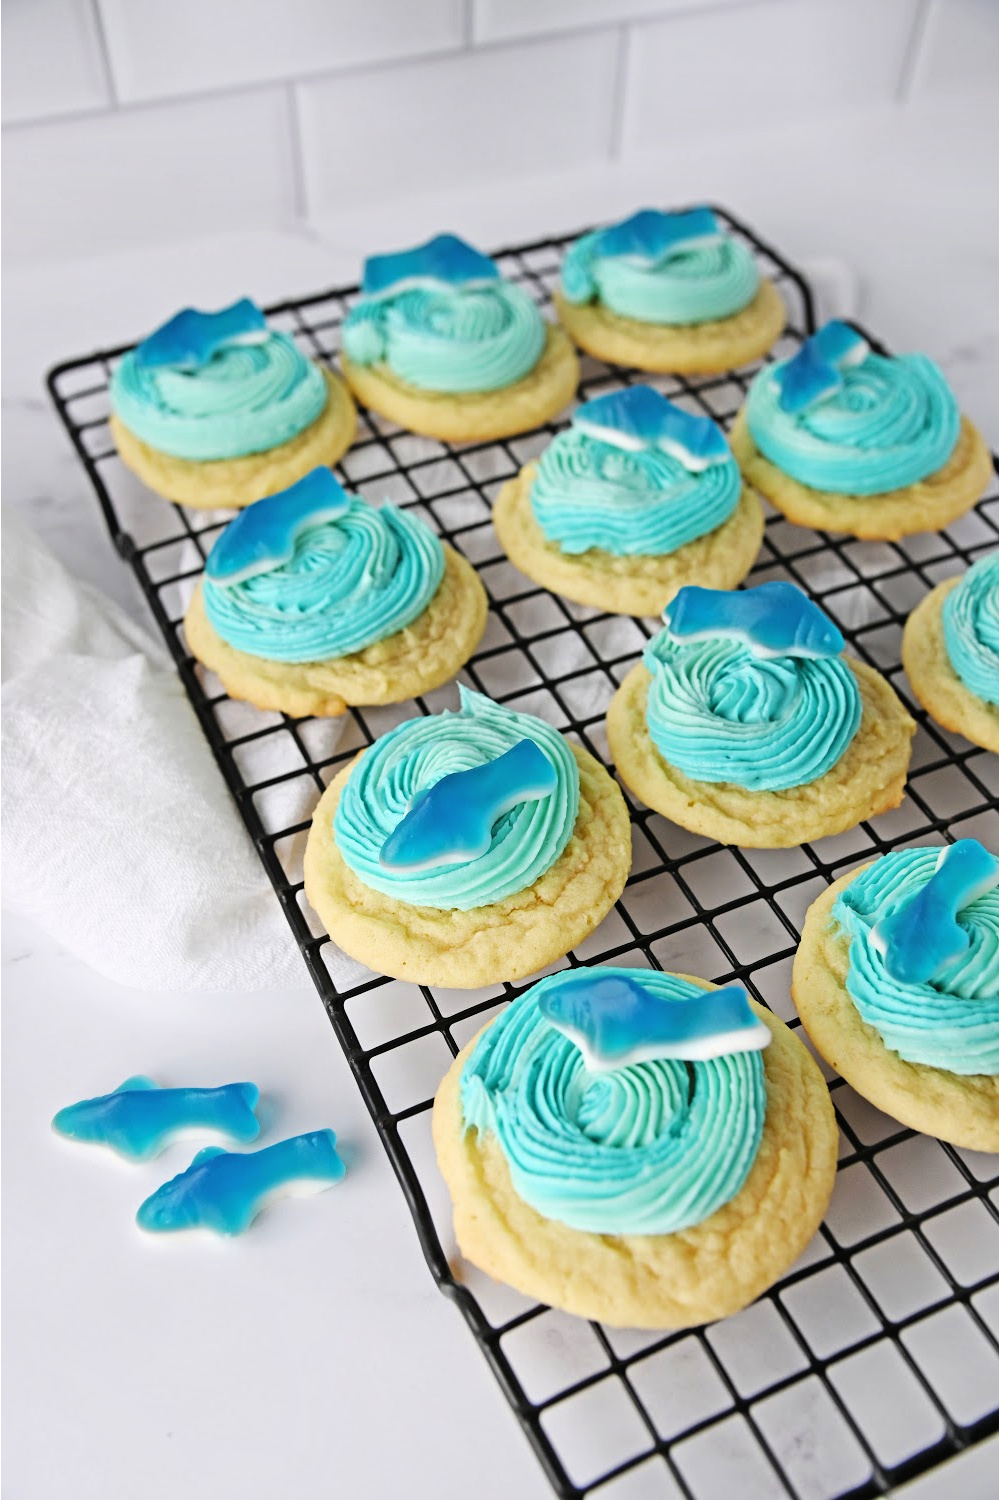 Shark cookies on a baking cooling rack with blue icing and a gummy shark.